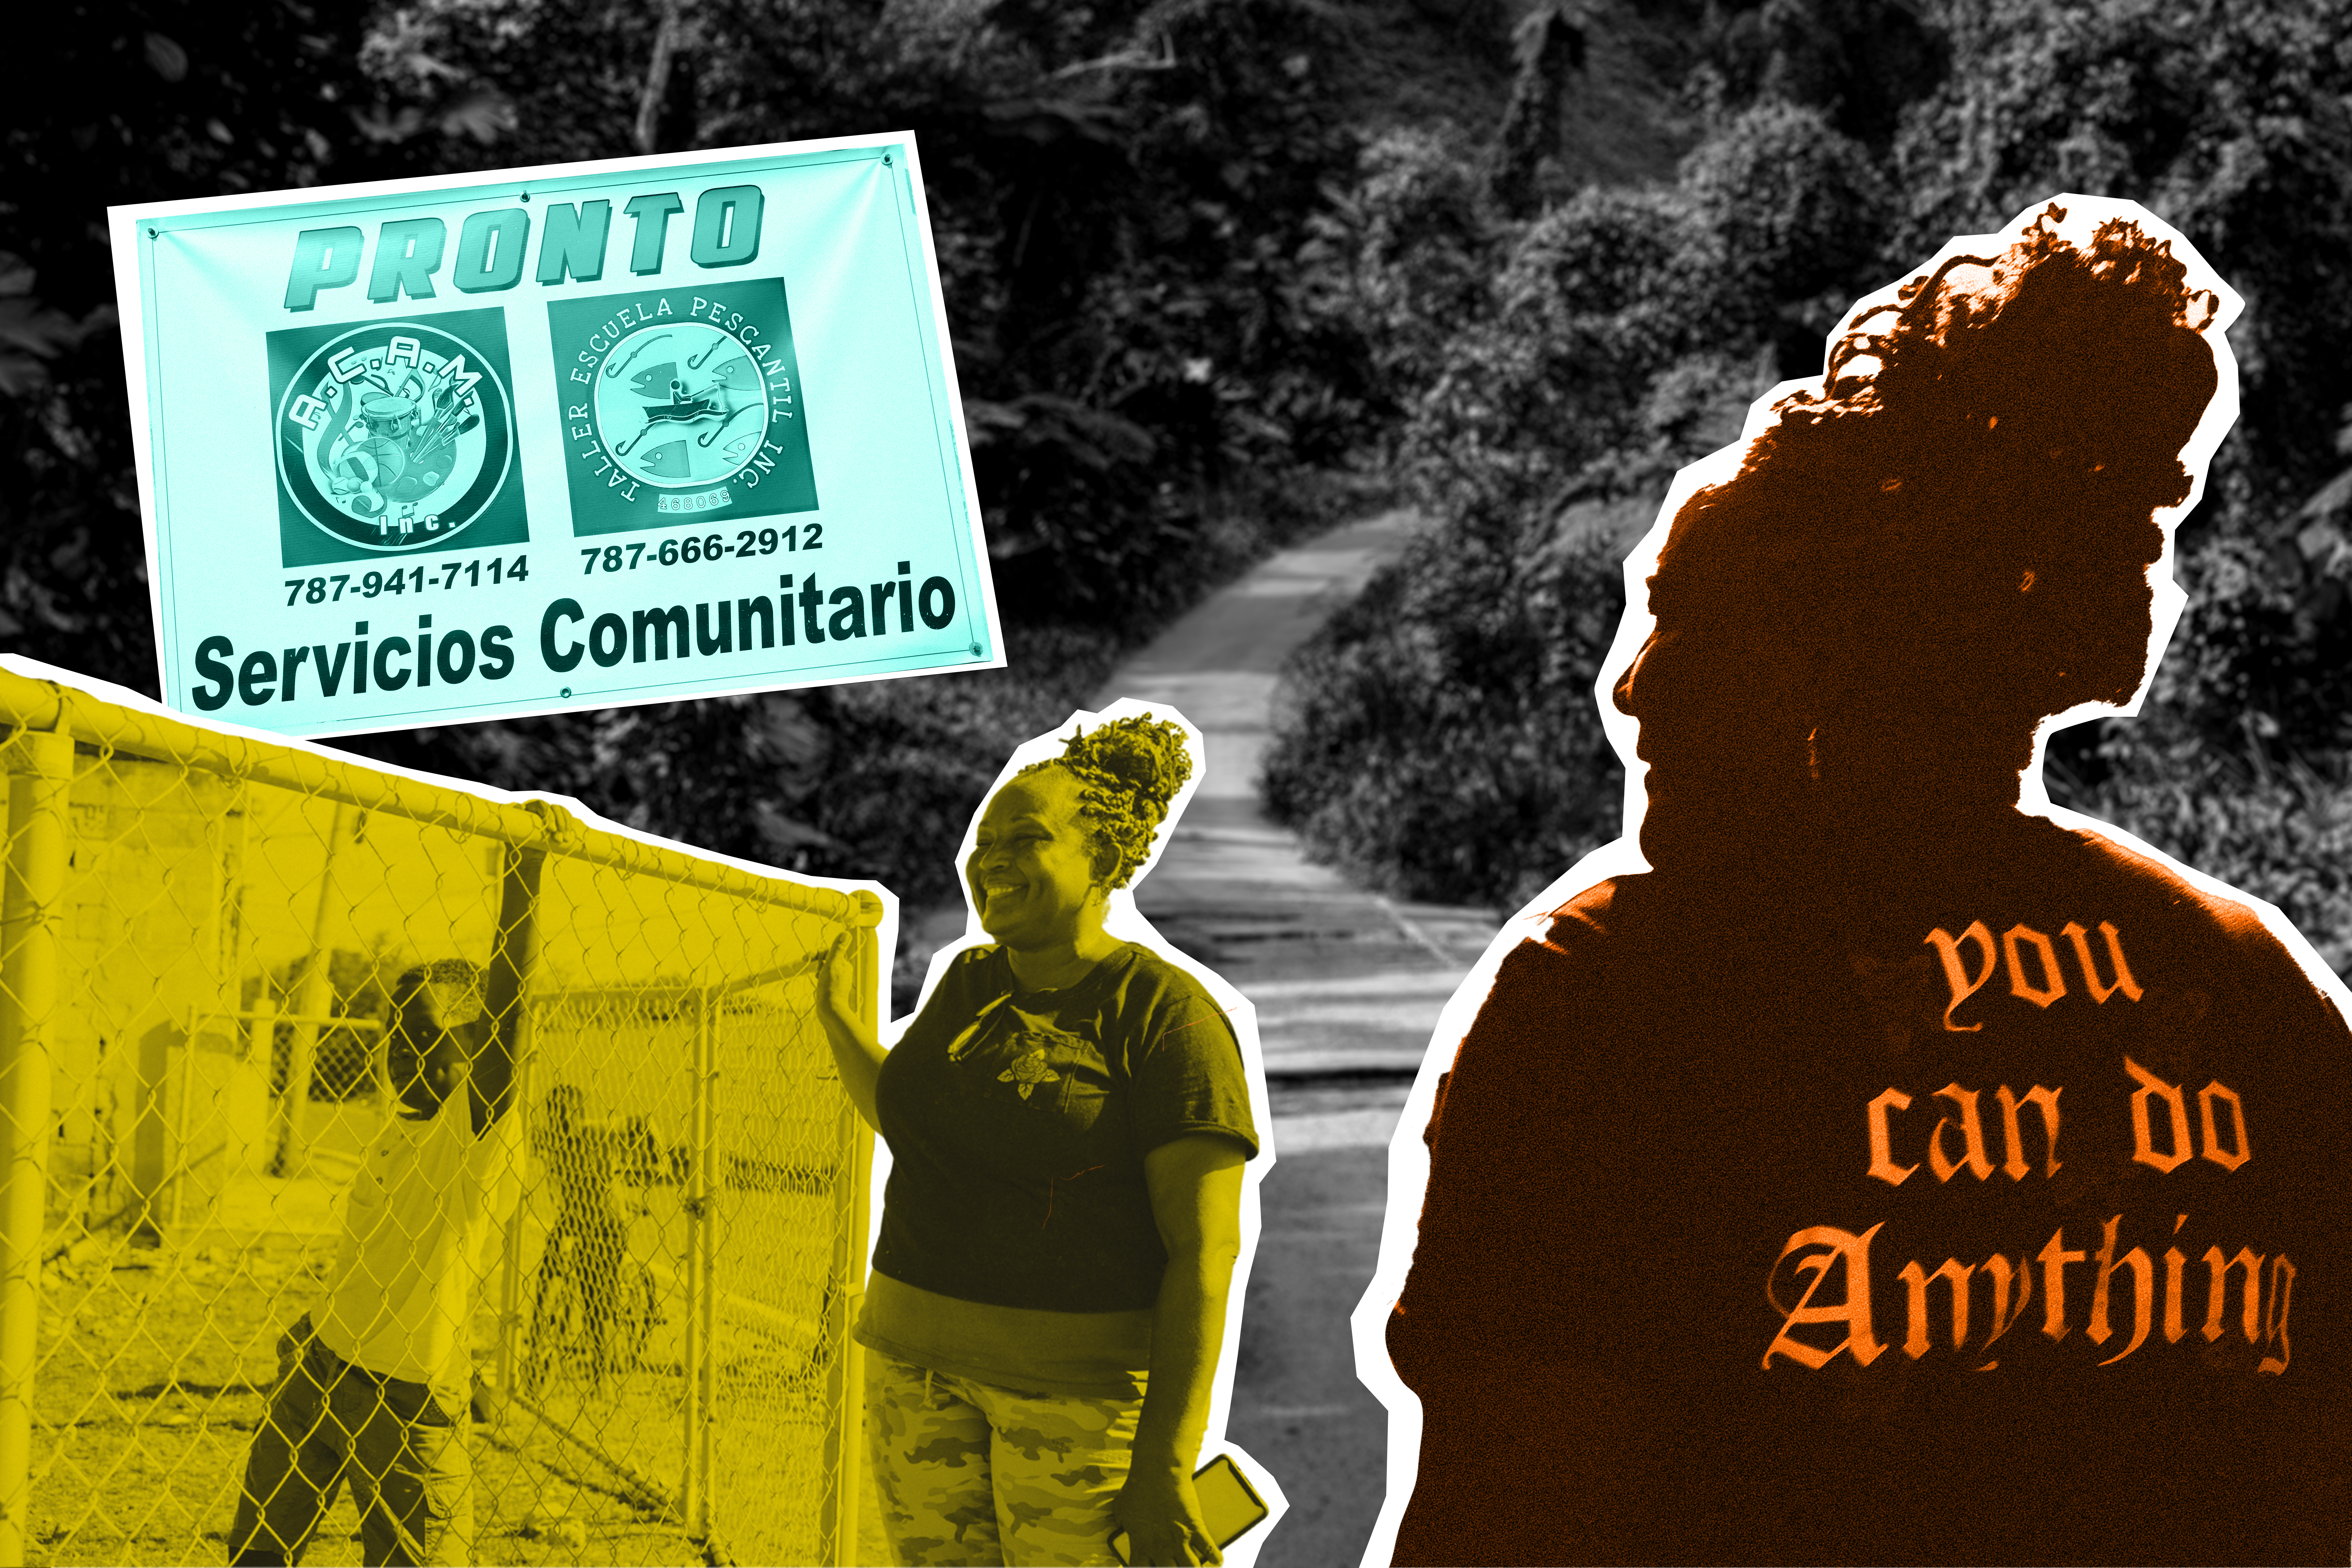 This is how Women Environmentalists are Fighting against Climate Change in Puerto Rico